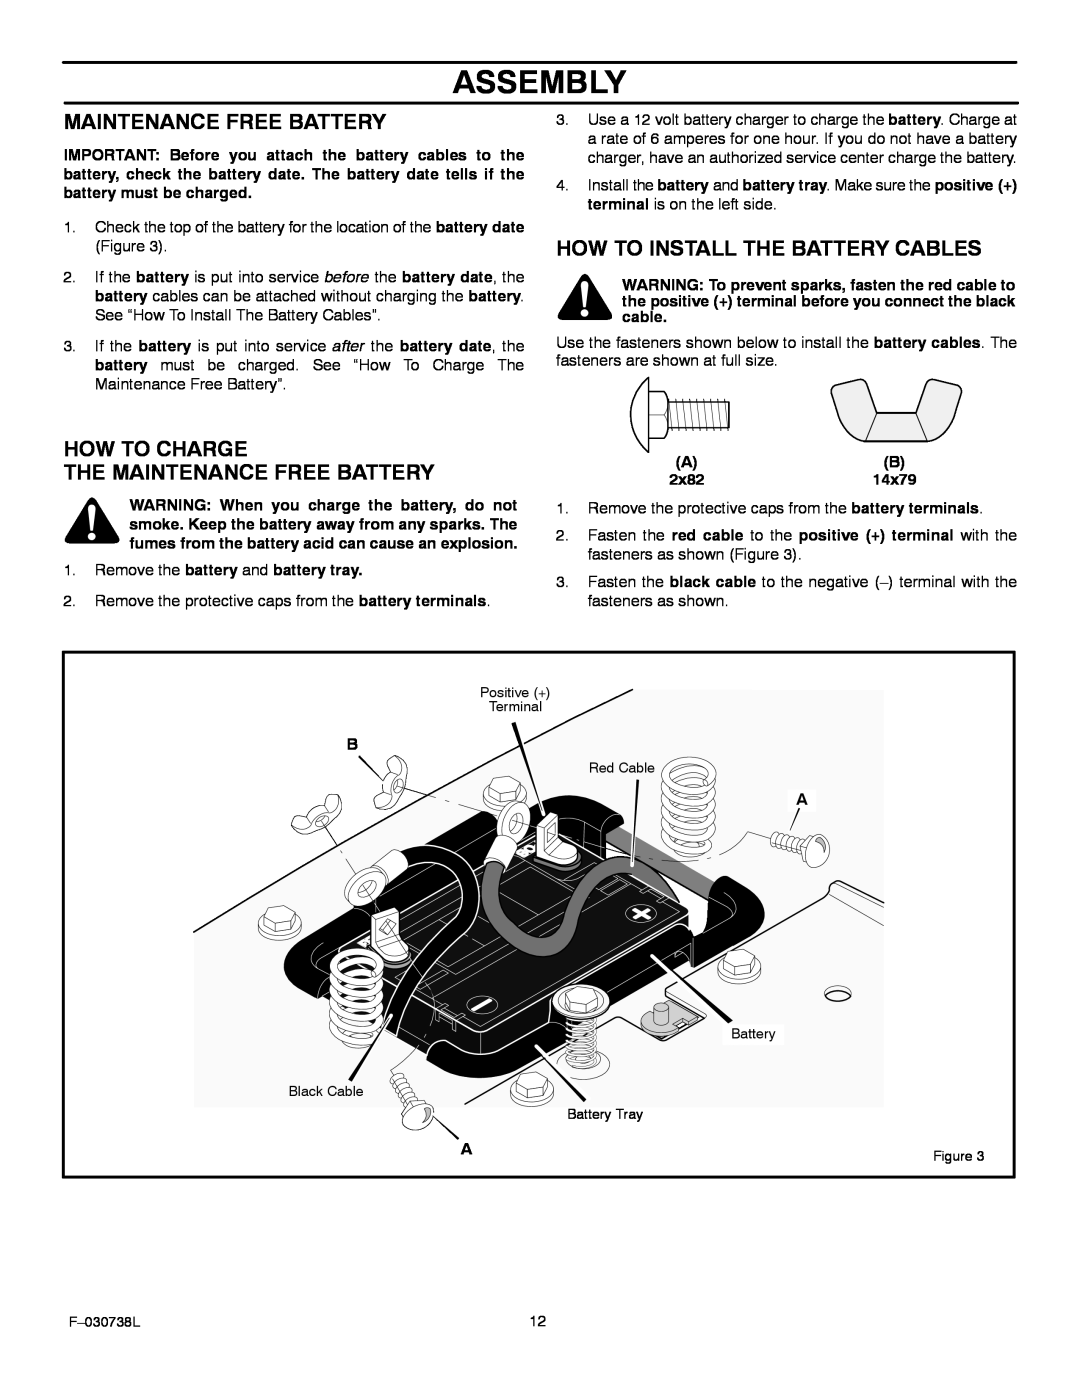 Murray 425603x99A manual Assembly, How To Charge The Maintenance Free Battery, How To Install The Battery Cables 